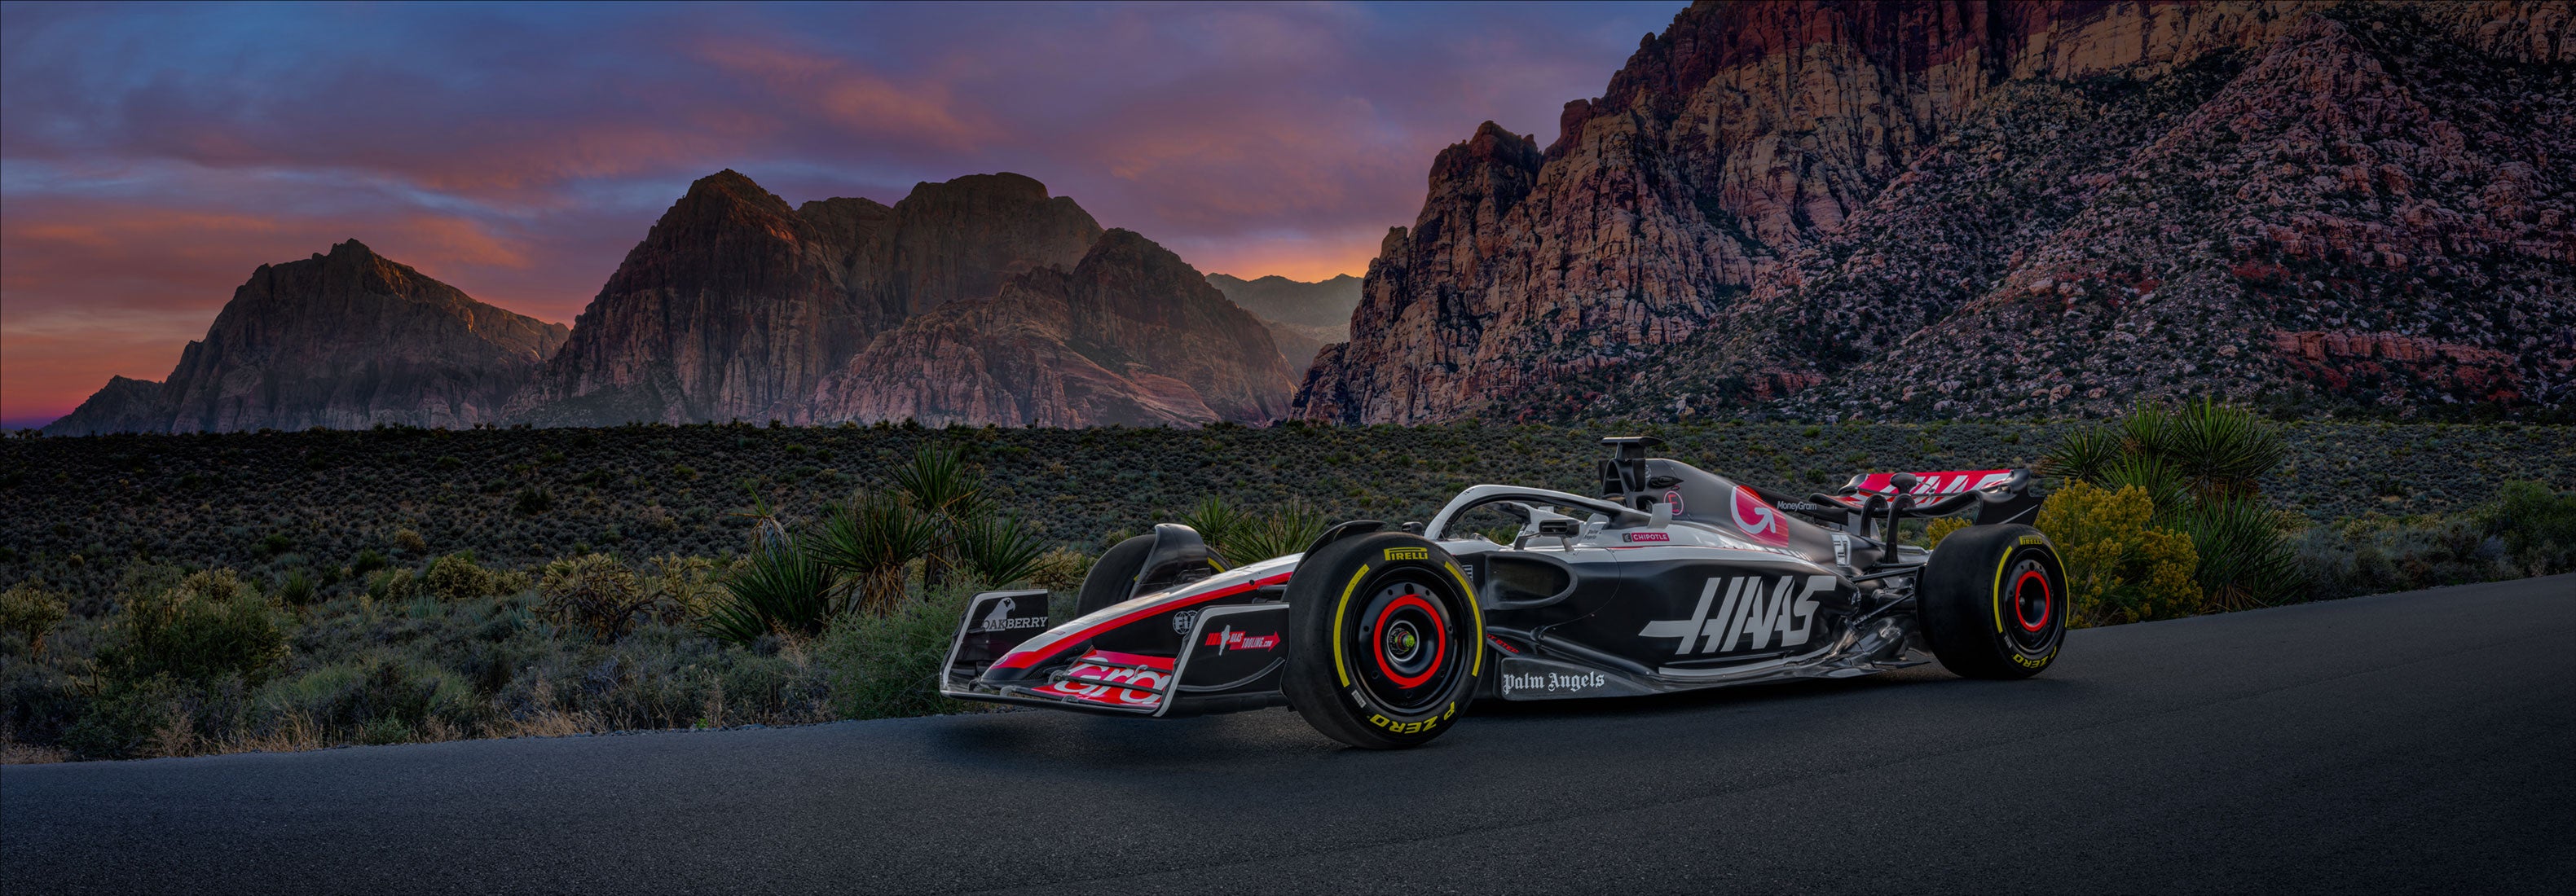 Photo of the Haas race car on the road in front of Red Rock Canyon, Las Vegas at sunset.